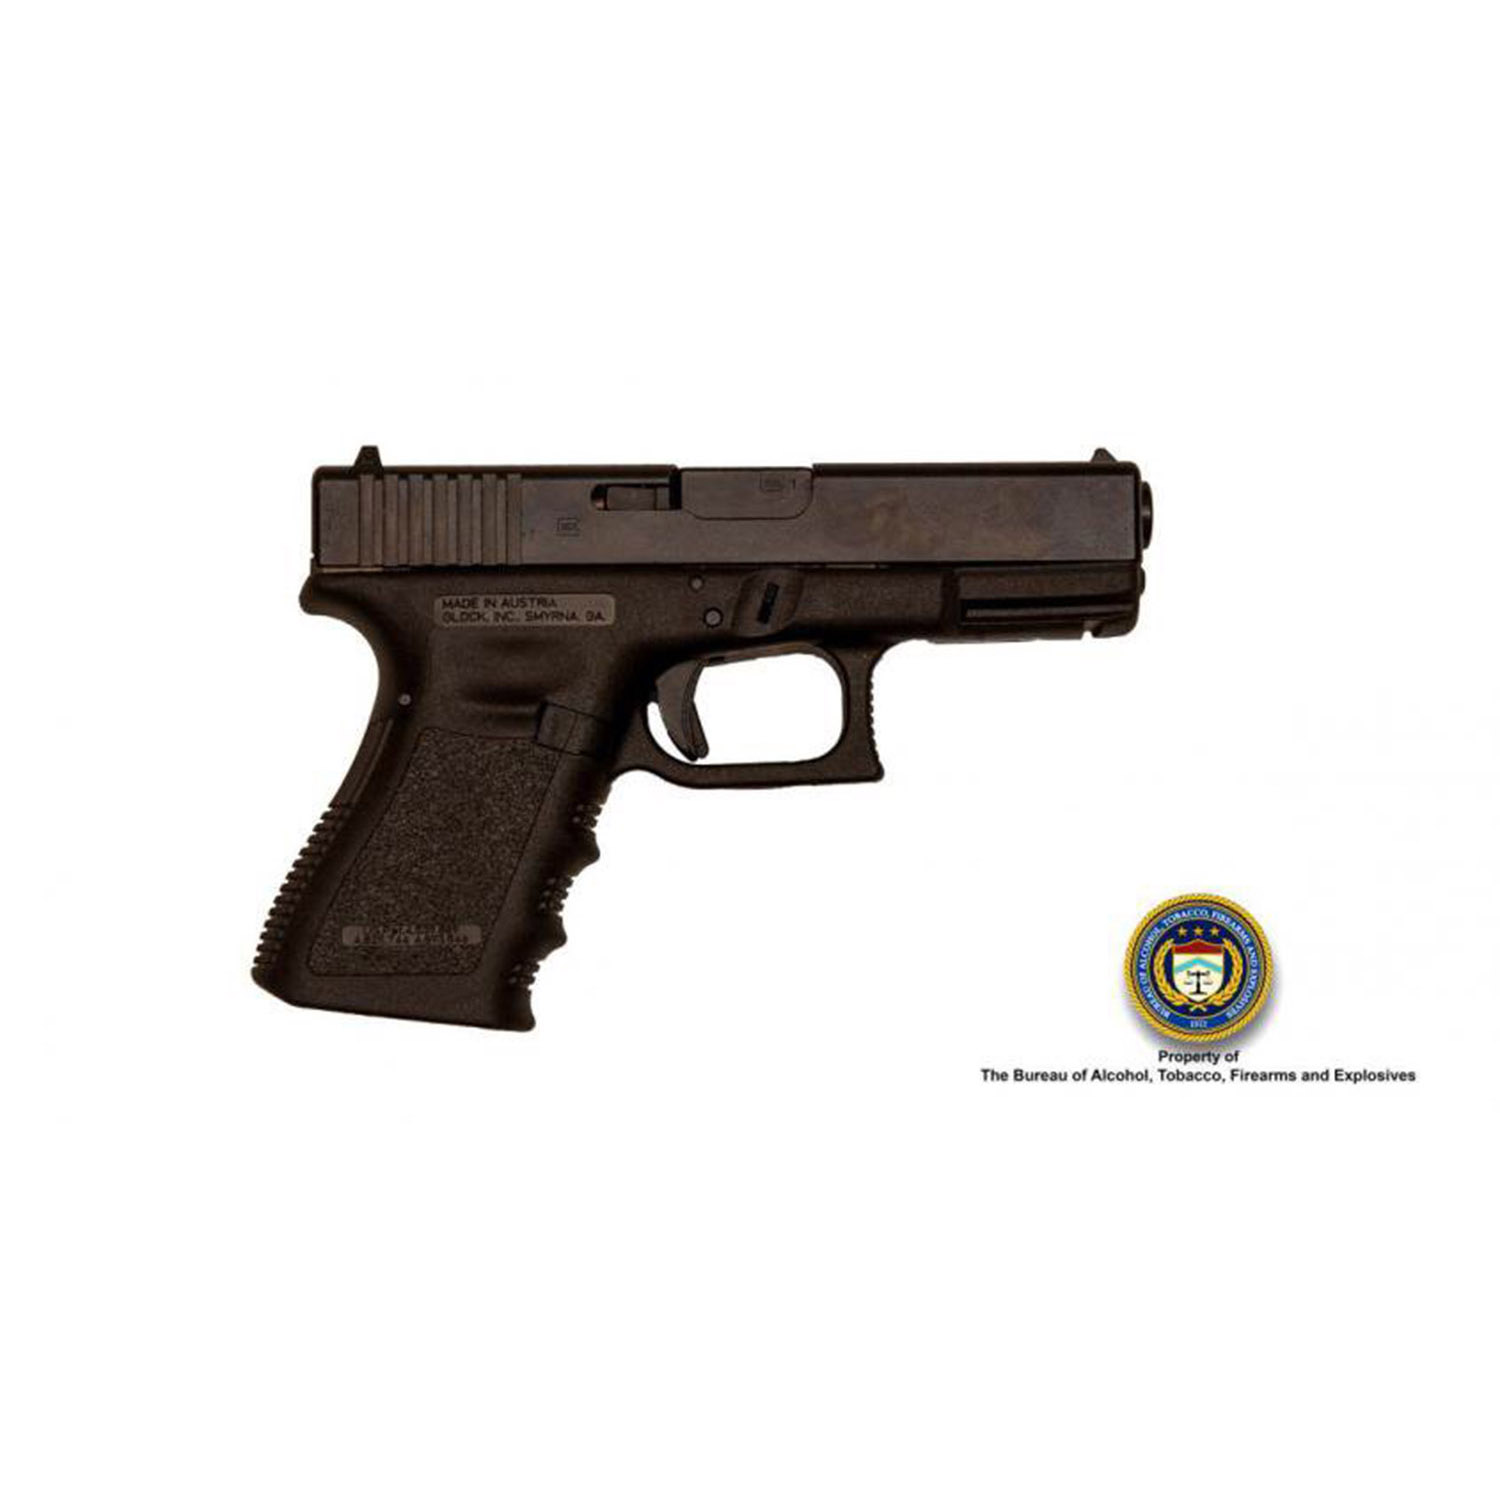 PHOTO: The Bureau of Alcohol, Tobacco, Firearms and Explosives released this picture of a 9mm semiautomatic pistol that they say is similar to the one used by Omar Mateen in the Orlando shooting.